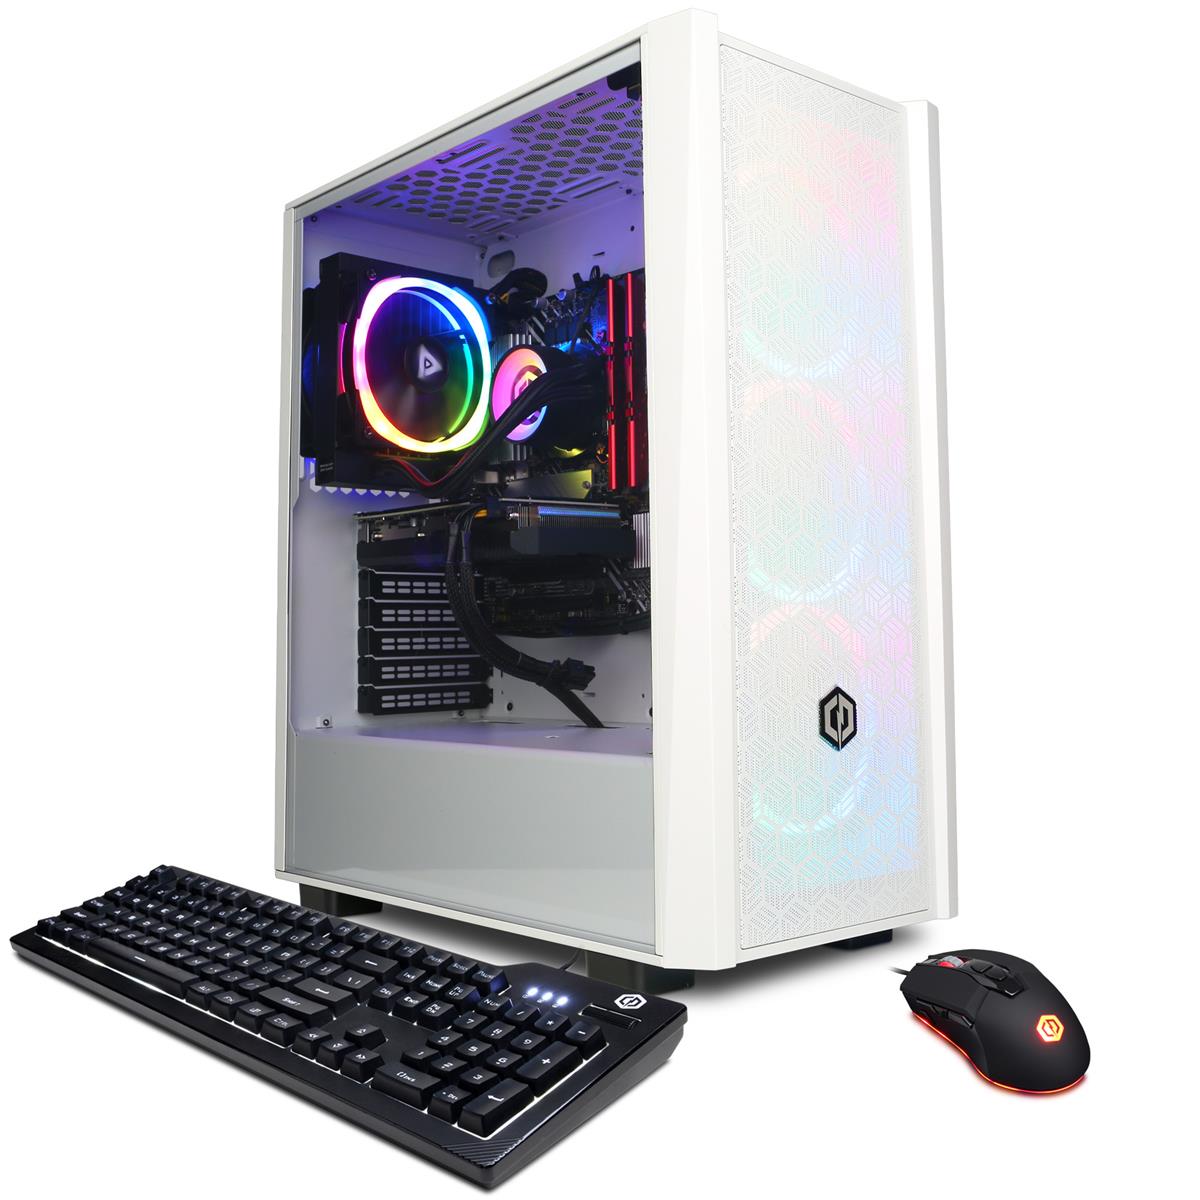 Image of CyberPowerPC Gamer Xtreme Gaming